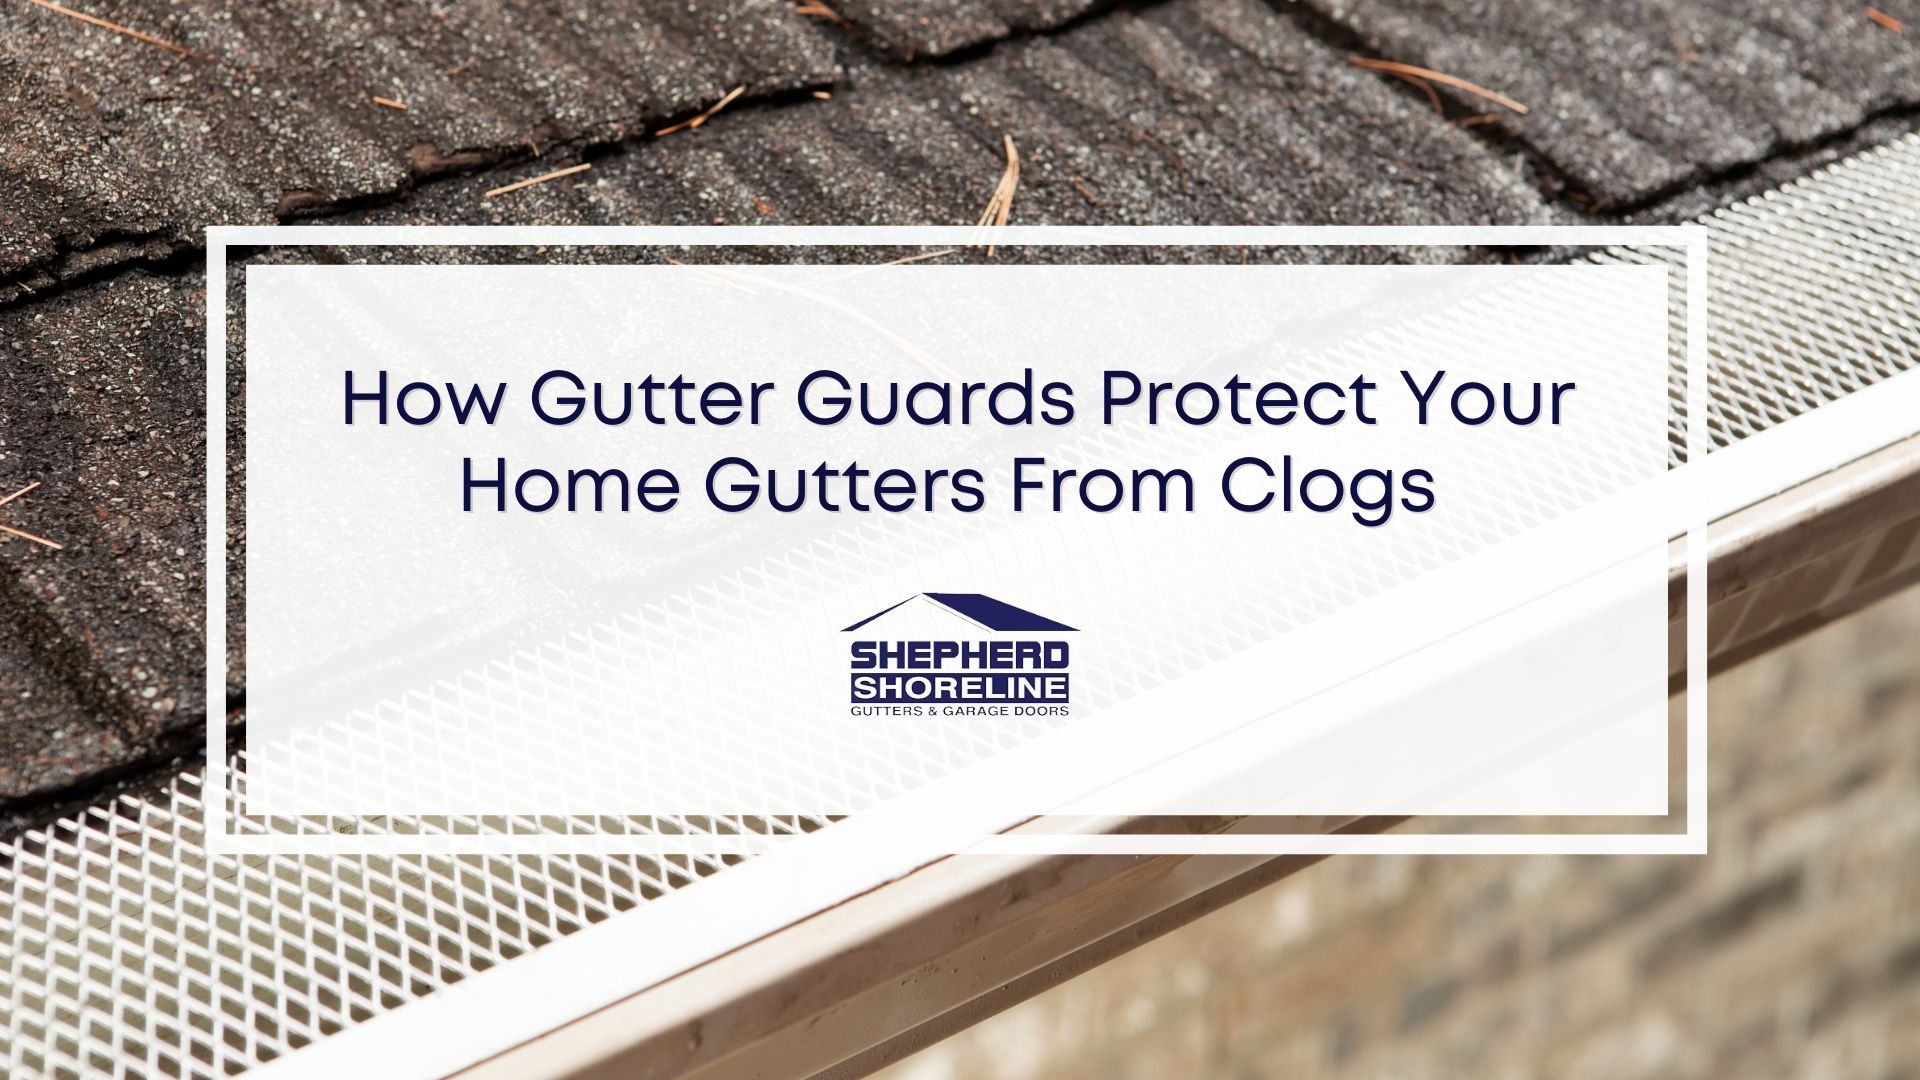 Featured image of how gutter guards protect your home gutters from clogs